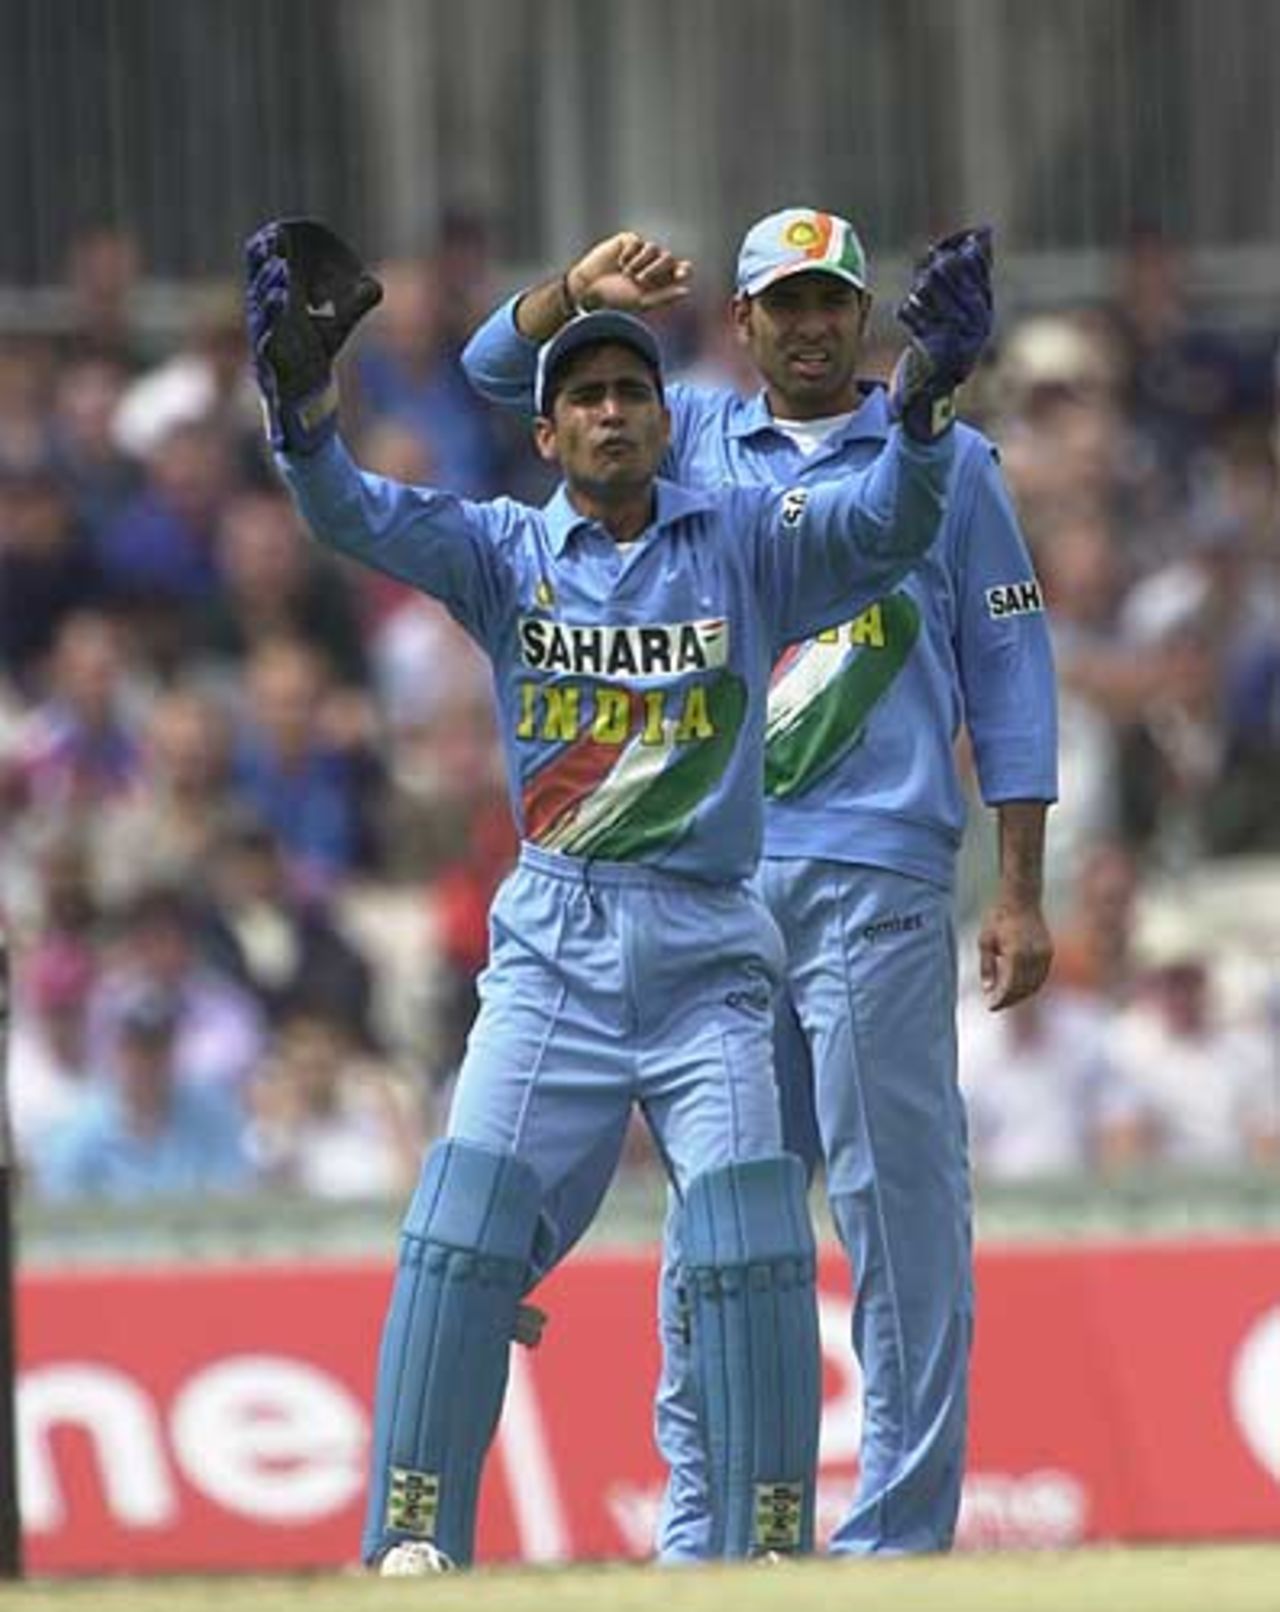 Keeper Ratra implores the umpire for a decision but Laxman looks a little puzzled, England v India at The Oval, July 2002